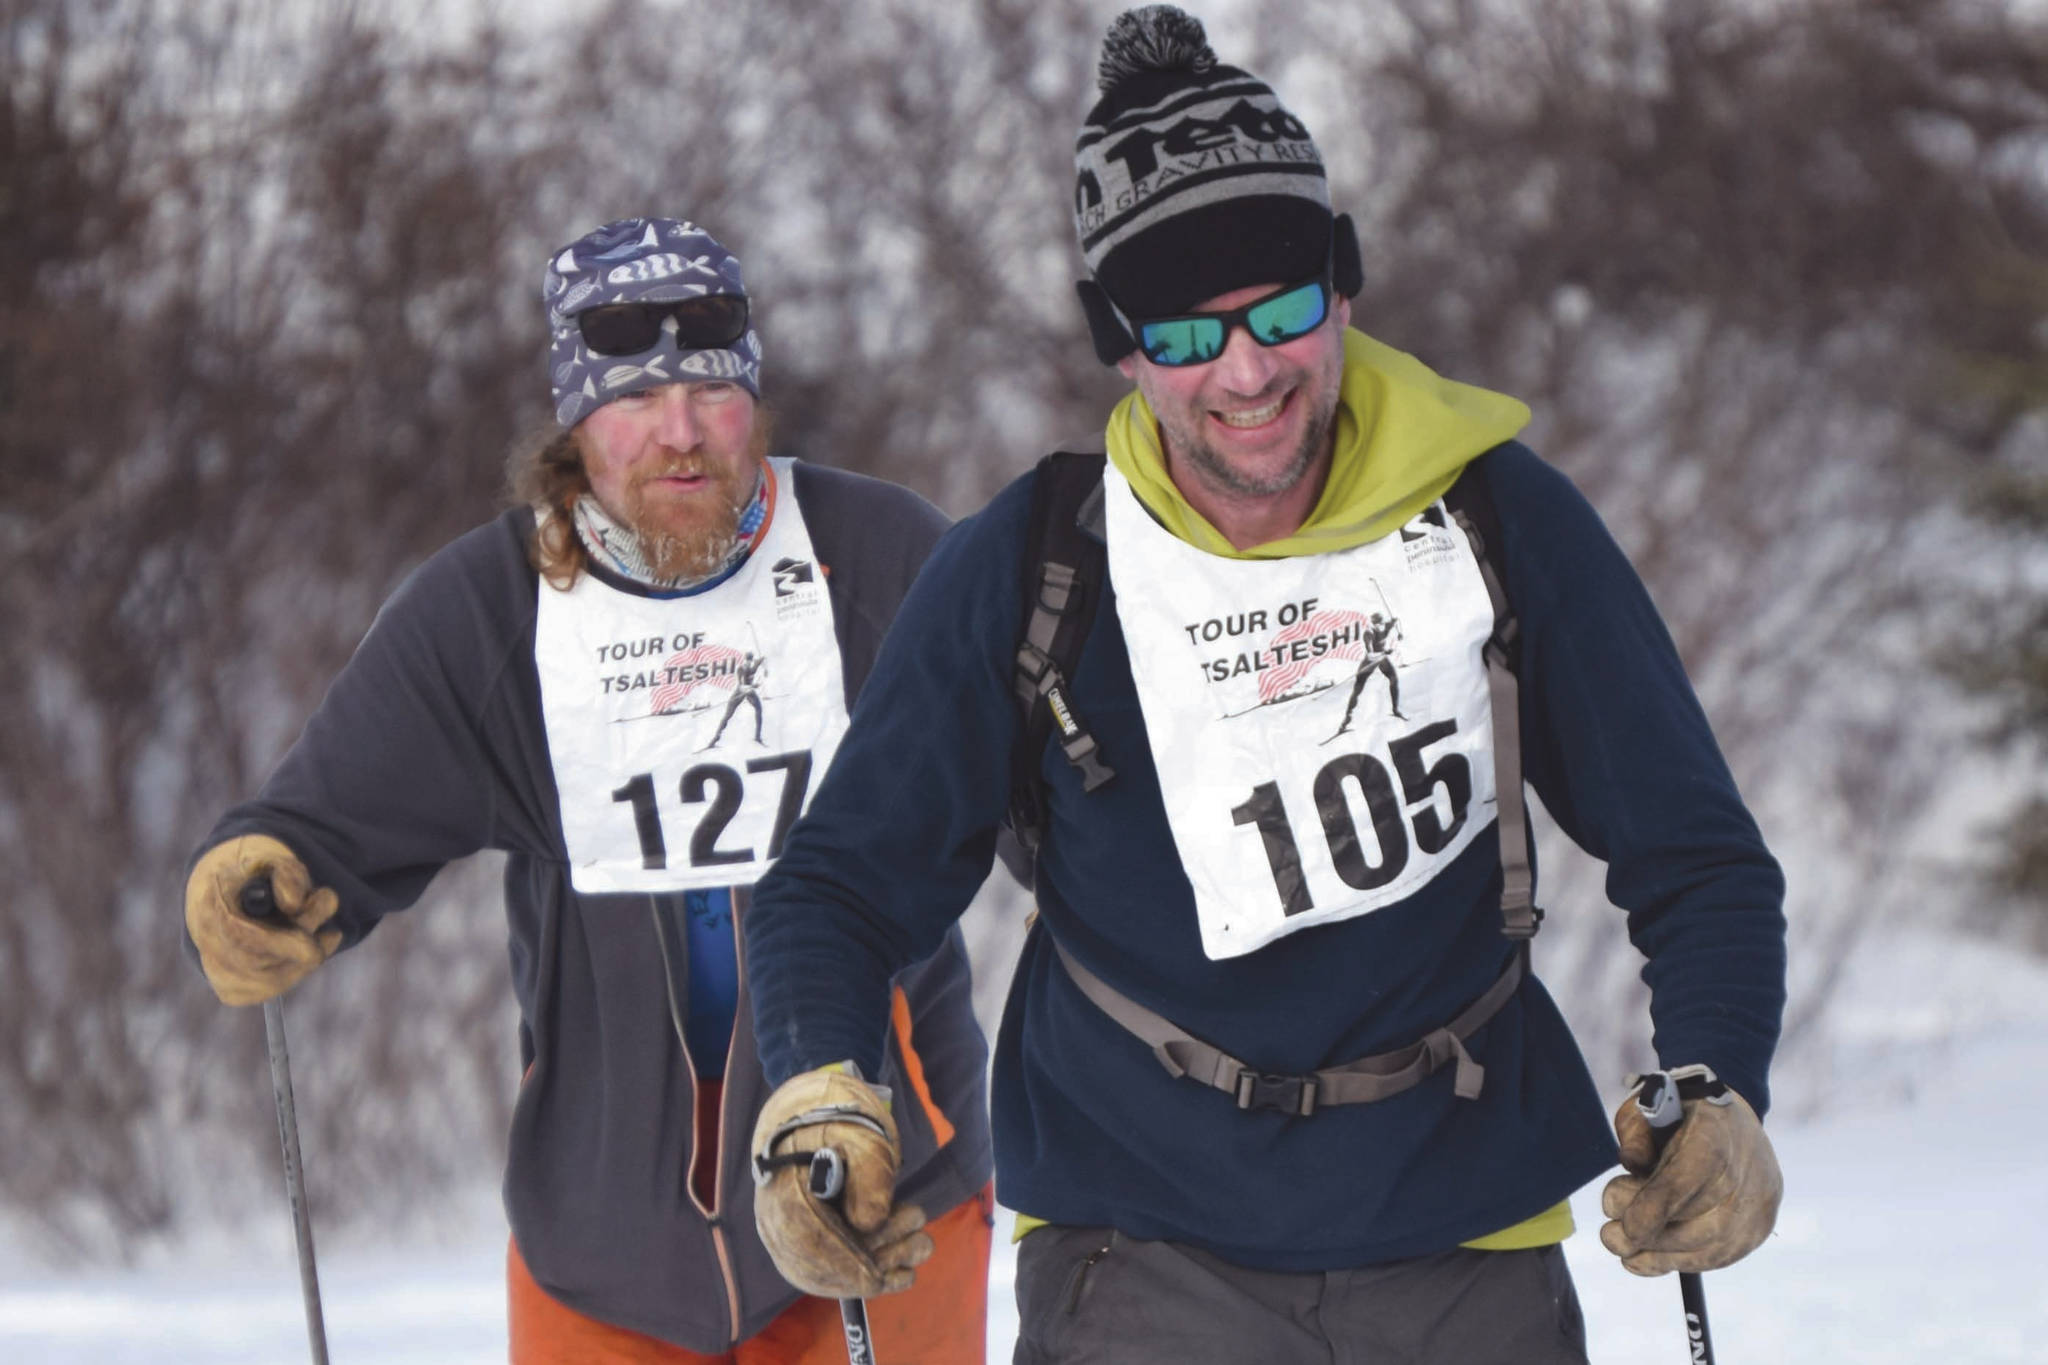 Sam Spencer, Erik Route and Josiah Brown, all of Cooper Landing, near the finish of the 20-kilometer classic race Sunday, Feb. 21, 2021, at Tsalteshi Trails just outside of Soldotna, Alaska. (Photo by Jeff Helminiak/Peninsula Clarion)